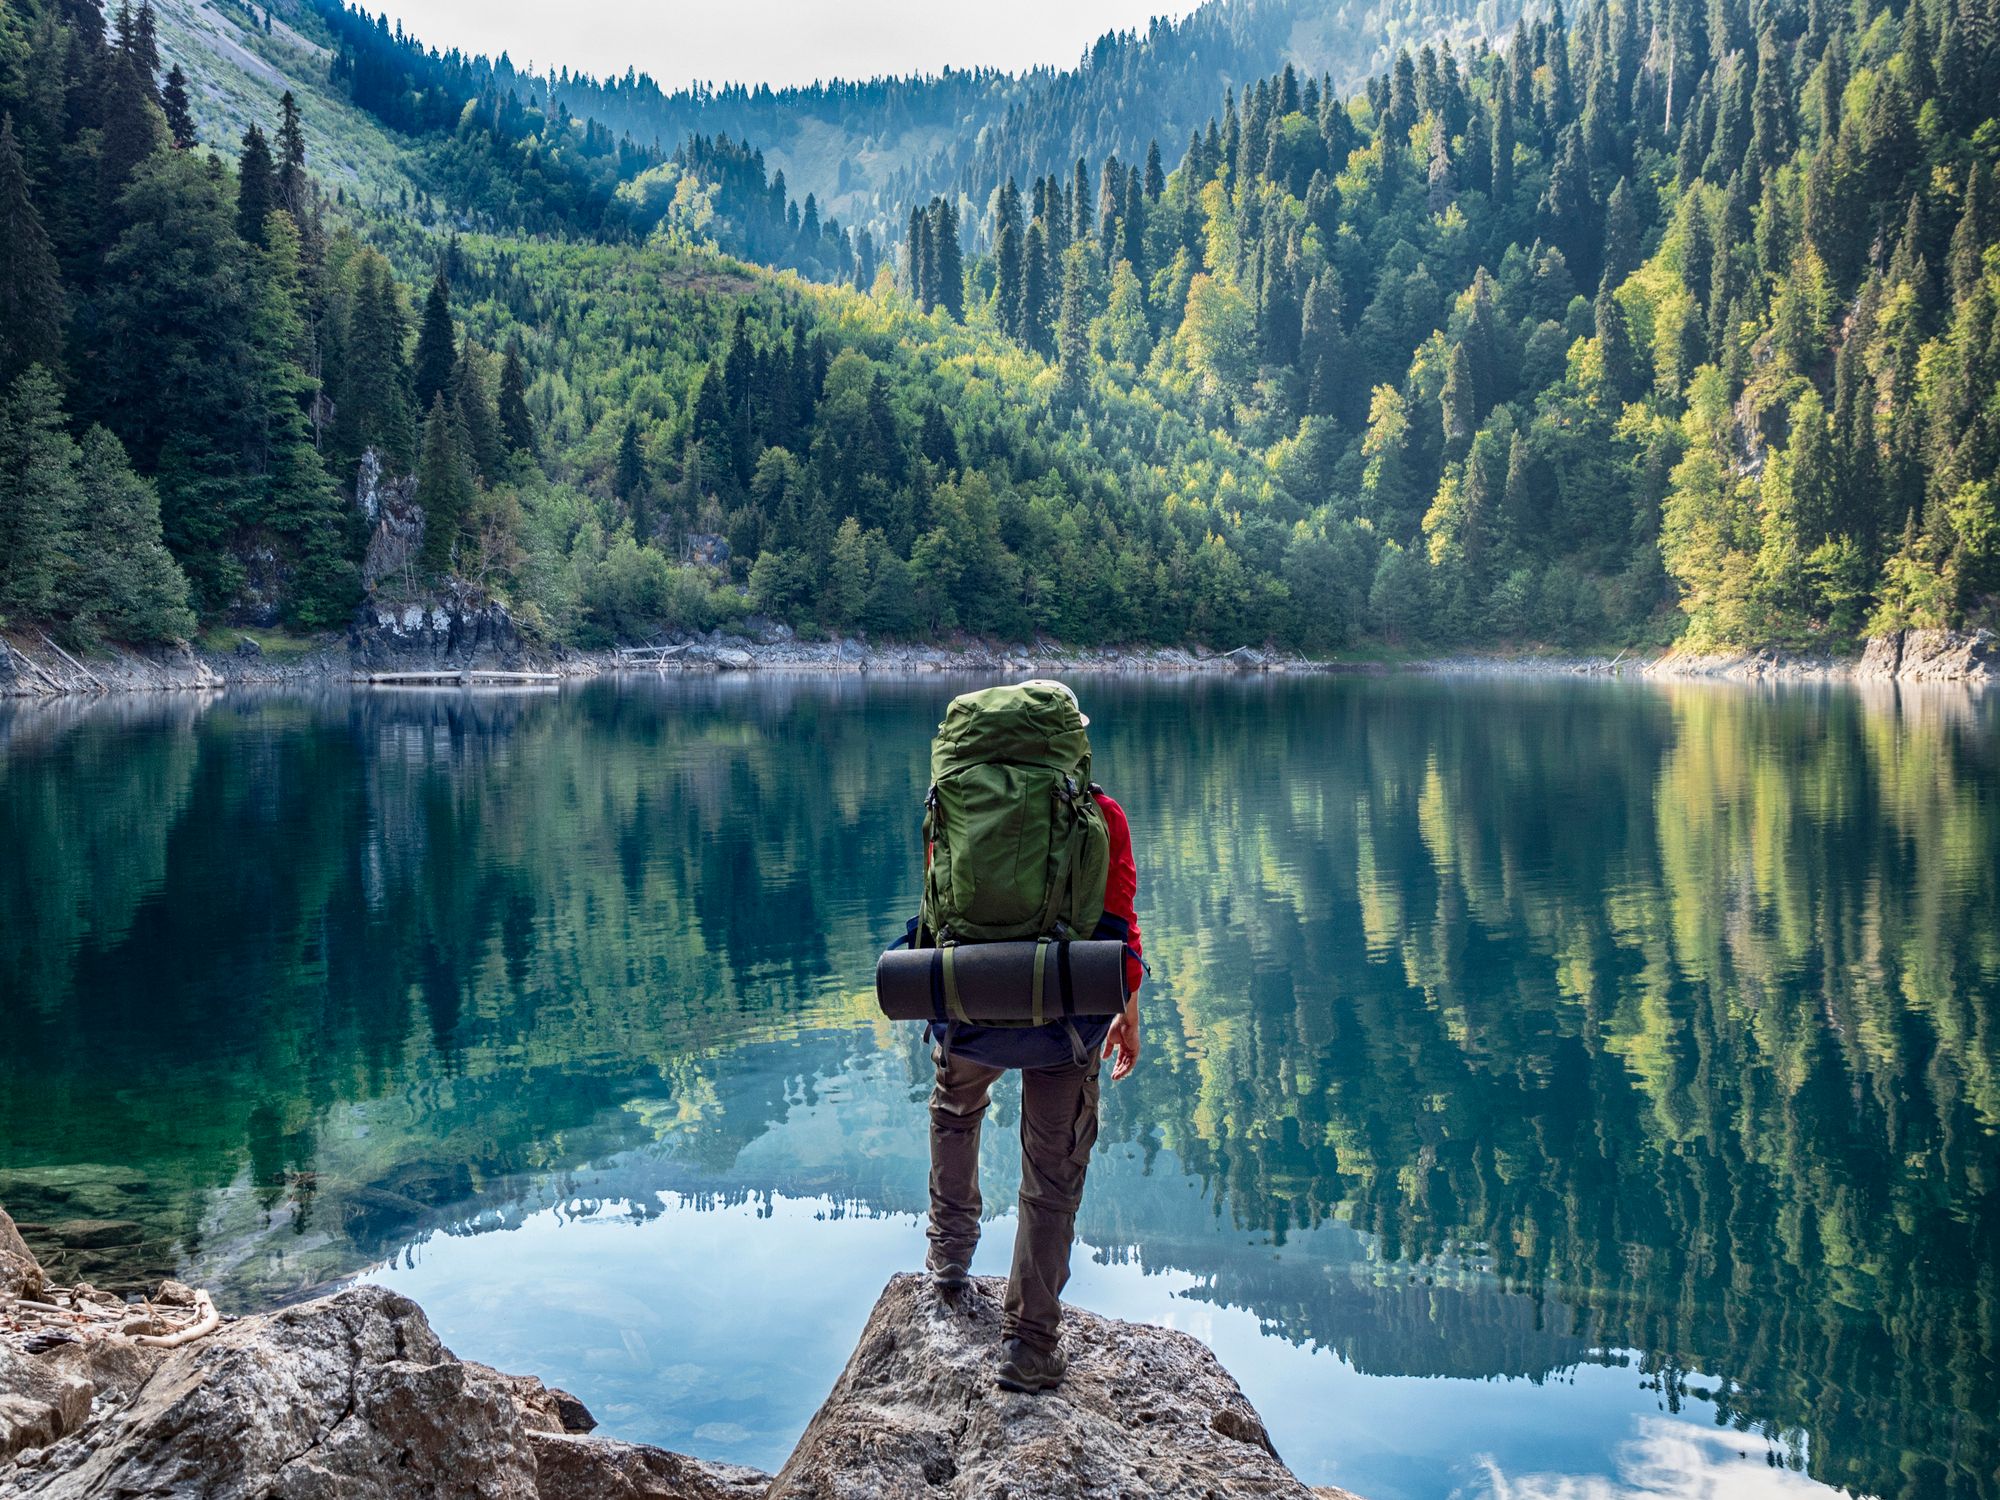 A hiker with a large backpack looking out at a lake.